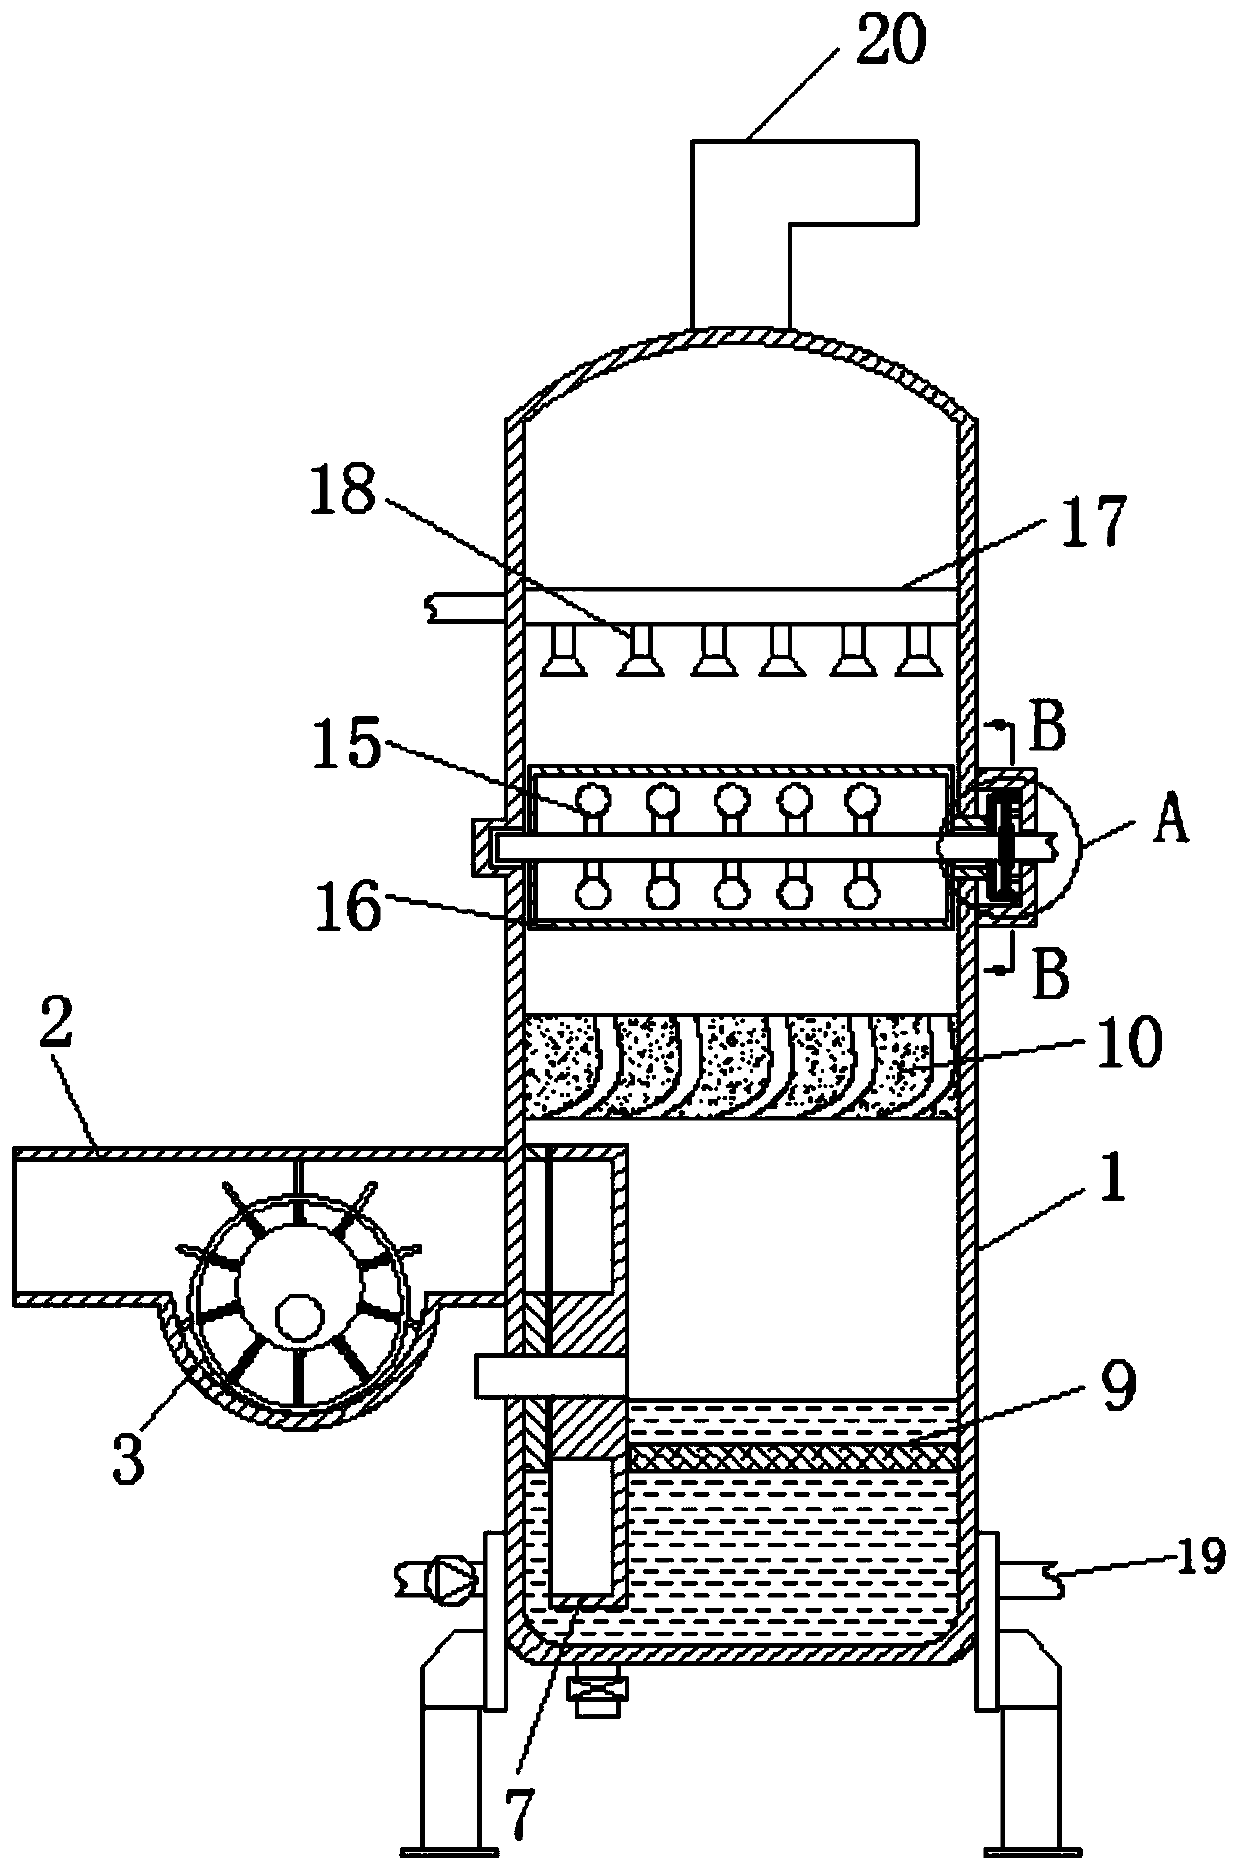 Incineration waste gas treatment device based on planetary gear transmission principle